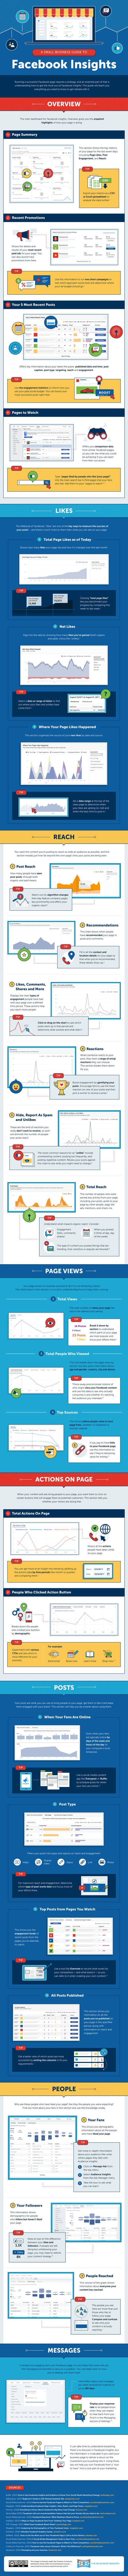 The Small Business Guide to Facebook Insights [Infographic]